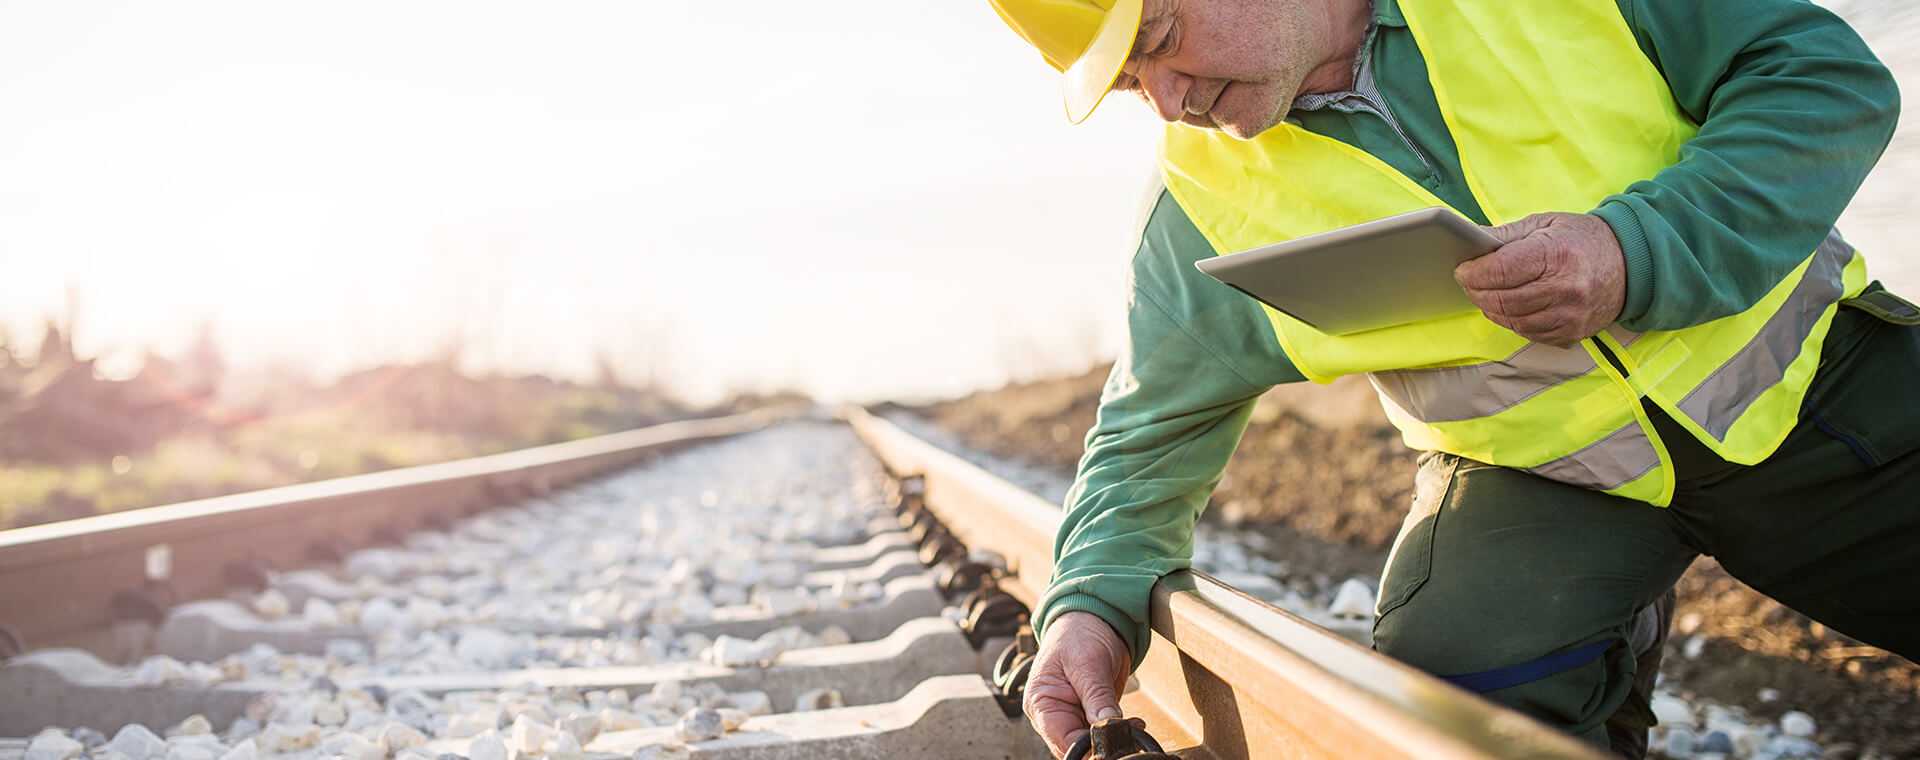 Someone inspecting a train track.